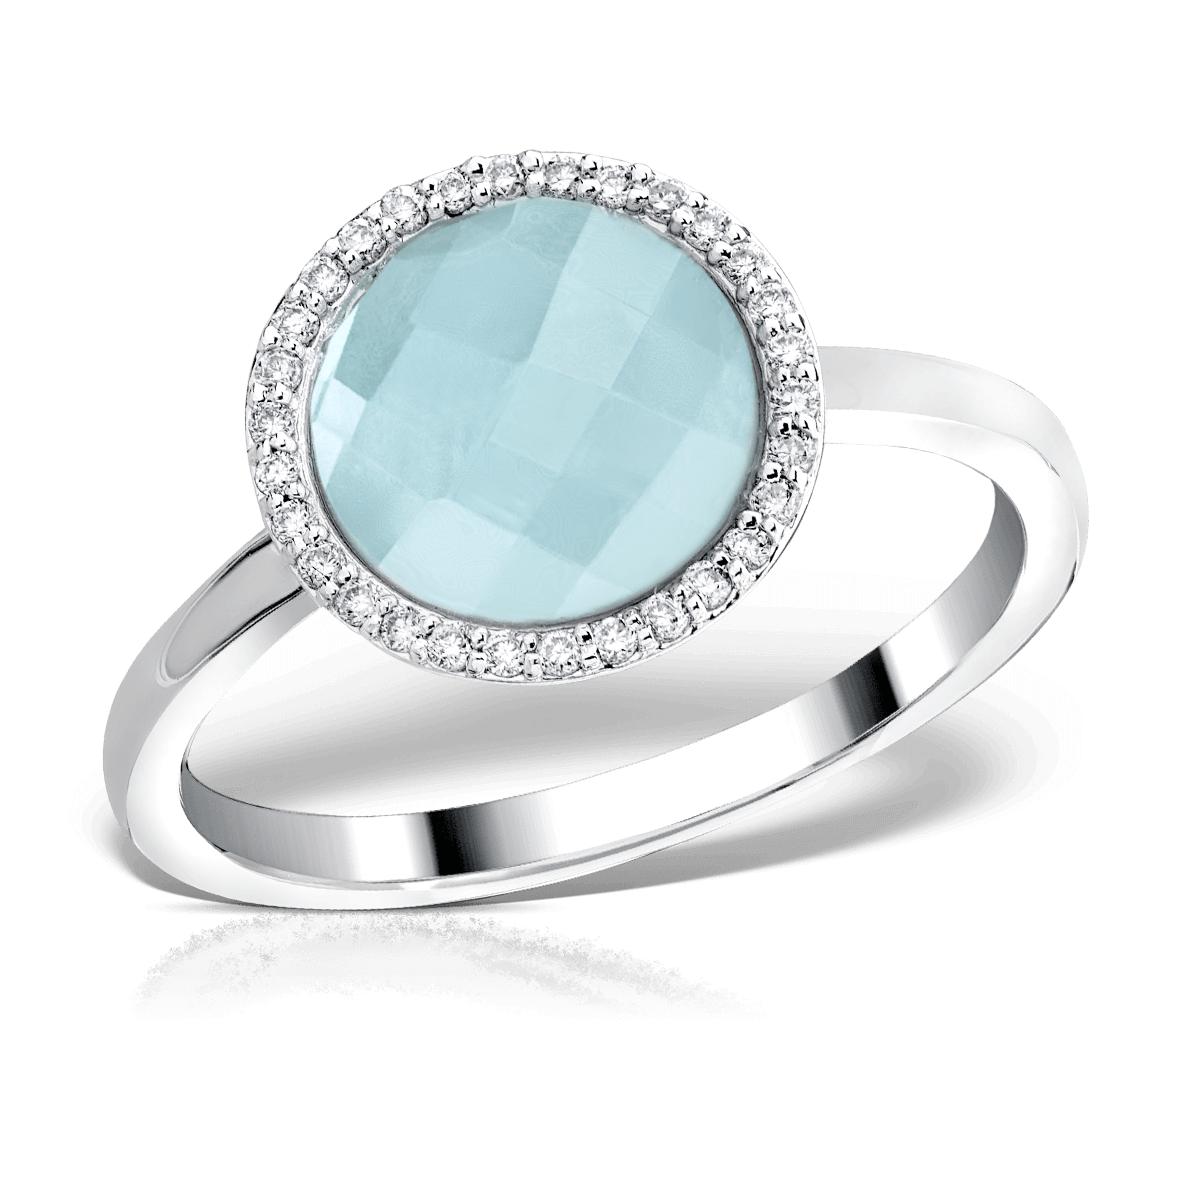 18K white gold ring with 3.52ct light blue topaz and 0.112ct diamonds